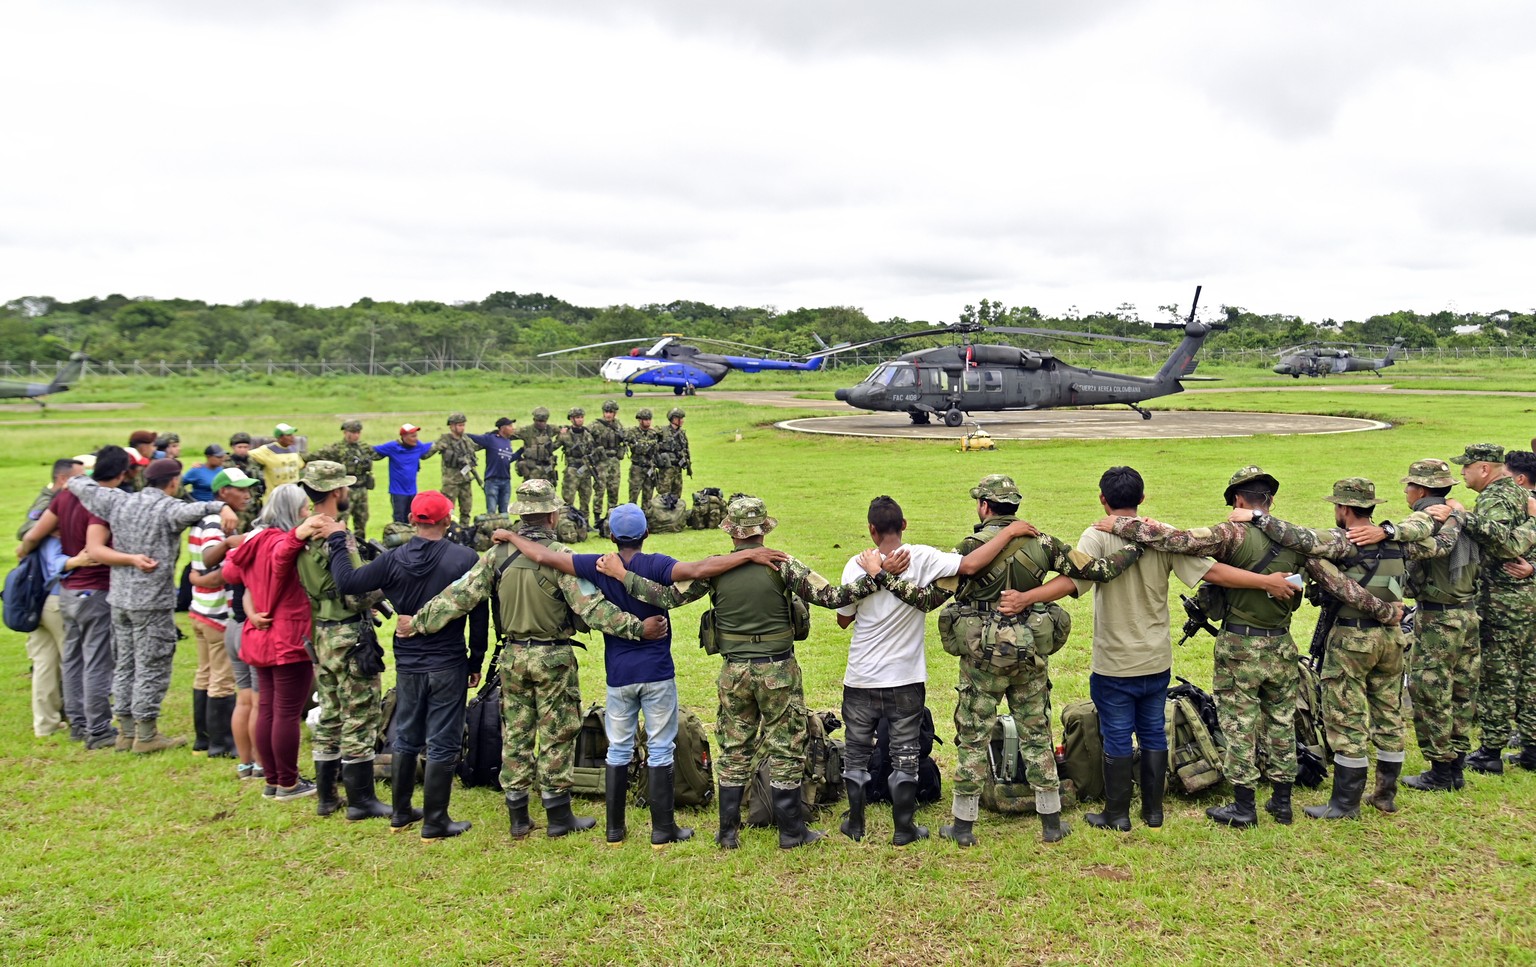 epa10644466 A handout photo made available by the Colombian Presidency of soldiers and indigenous people who support the search for the four children lost in the jungle after a plane crash, in Guaviar ...